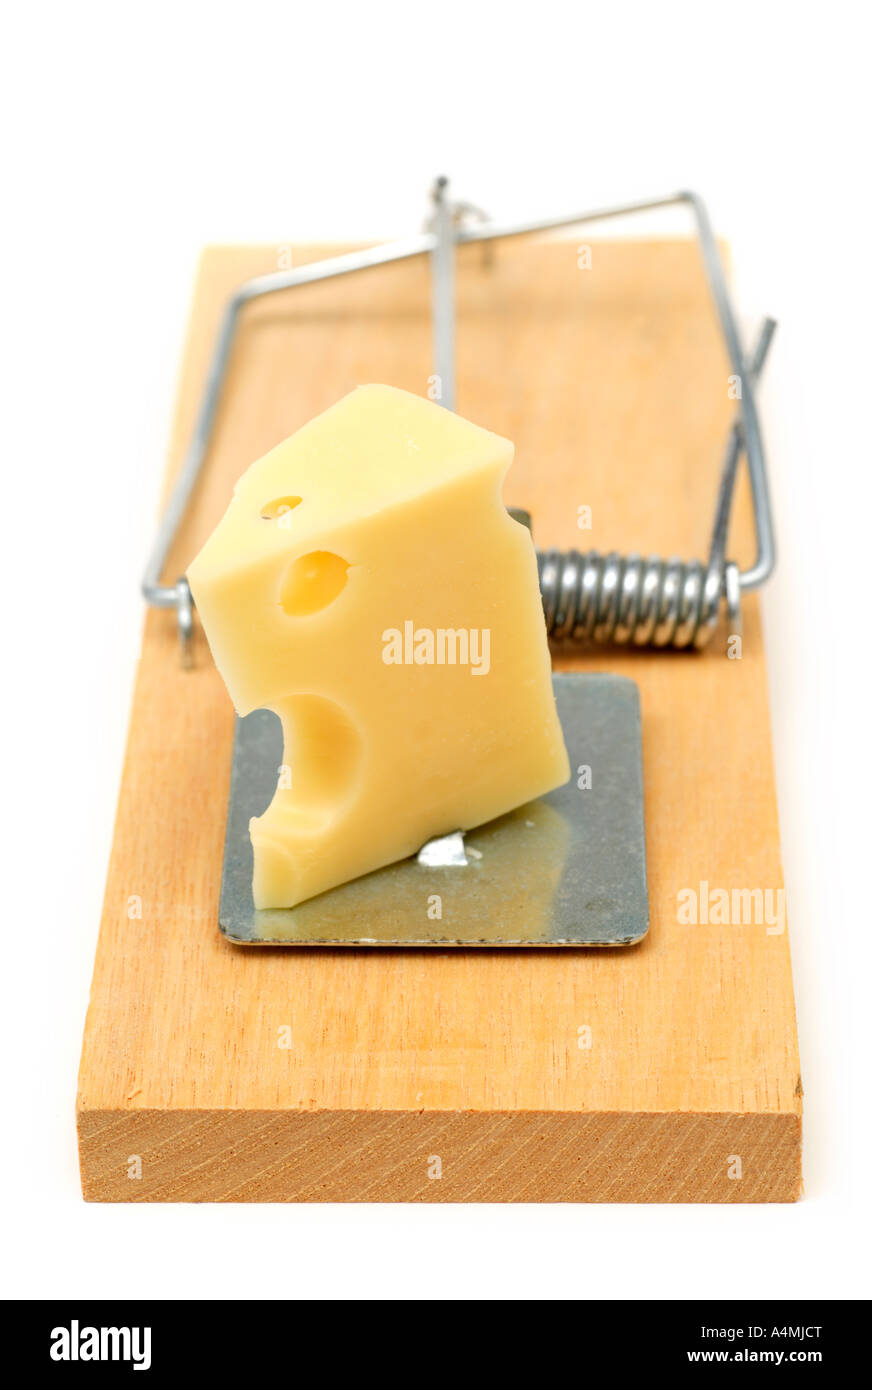 https://c8.alamy.com/comp/A4MJCT/mousetrap-baited-with-cheese-A4MJCT.jpg